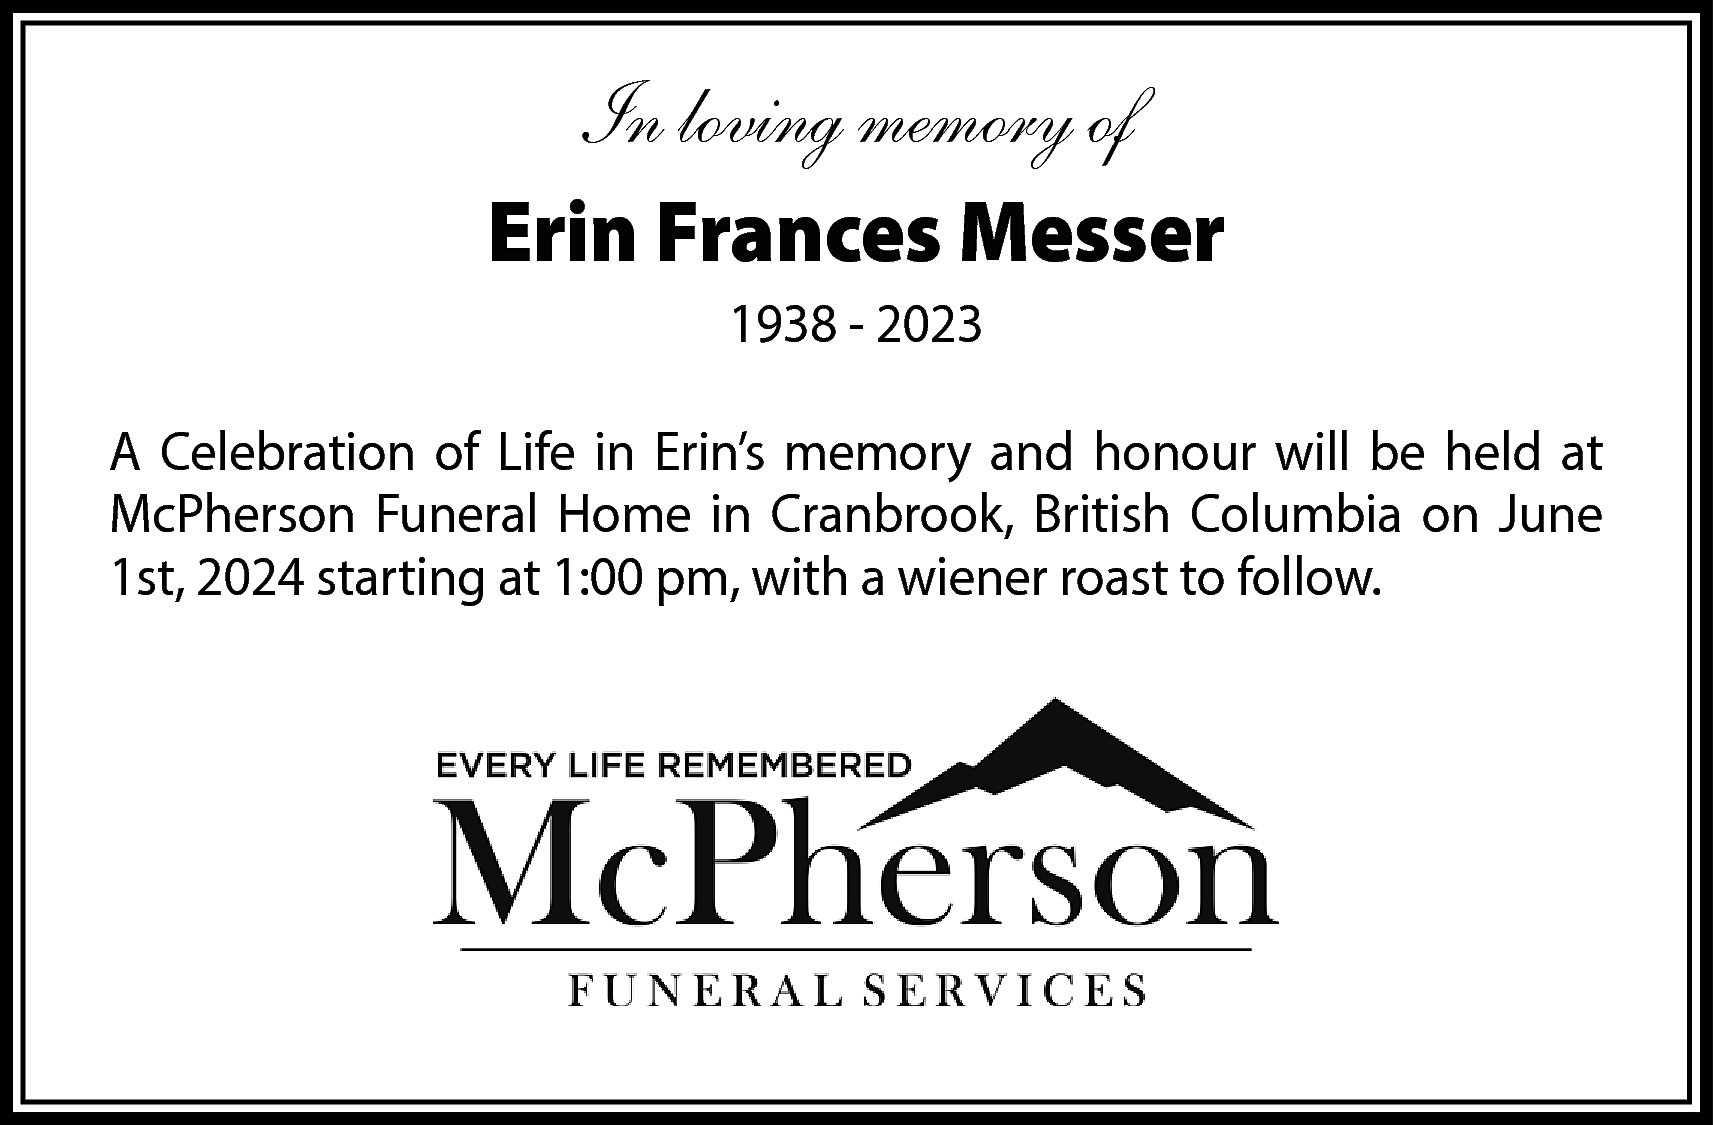 In loving memory of <br>Erin  In loving memory of  Erin Frances Messer  1938 - 2023  A Celebration of Life in Erin’s memory and honour will be held at  McPherson Funeral Home in Cranbrook, British Columbia on June  1st, 2024 starting at 1:00 pm, with a wiener roast to follow.    